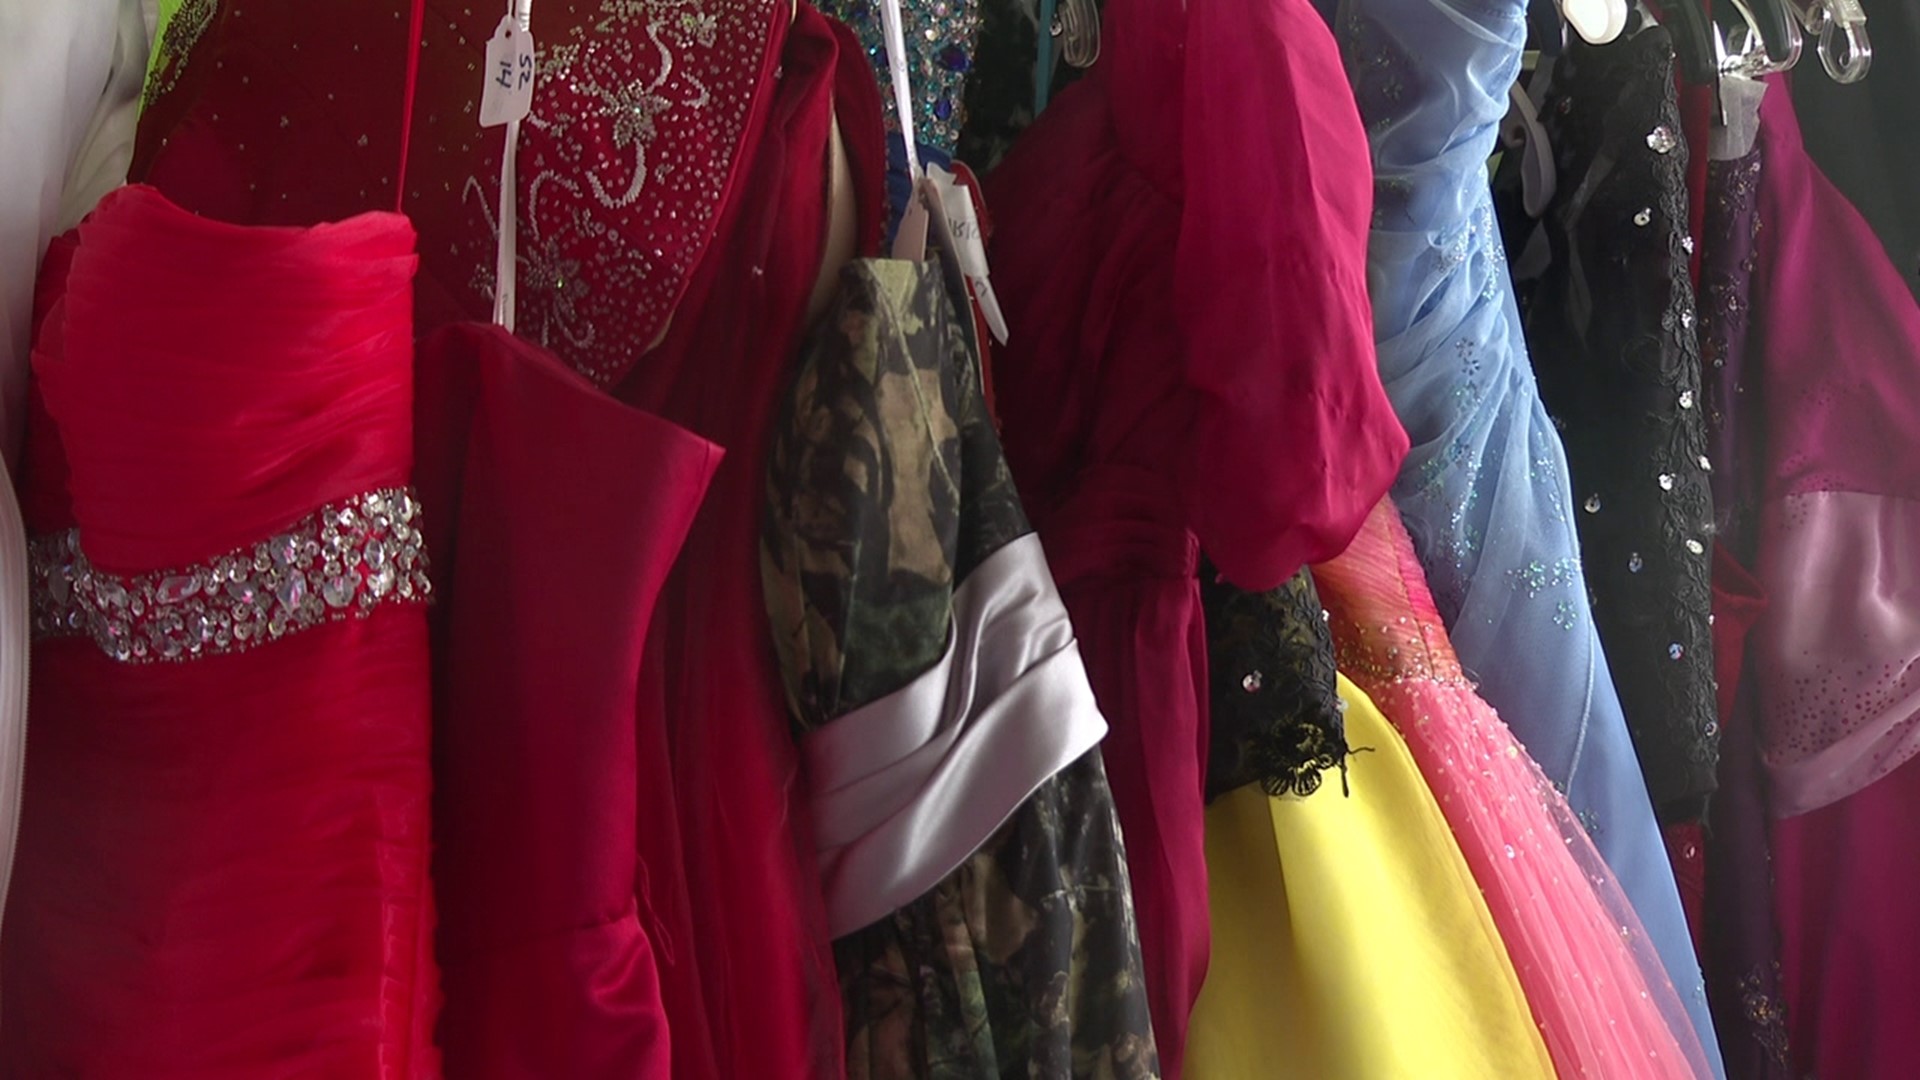 The dress drive was held at the Shoppes at Rock Creek in Olyphant on Saturday afternoon.